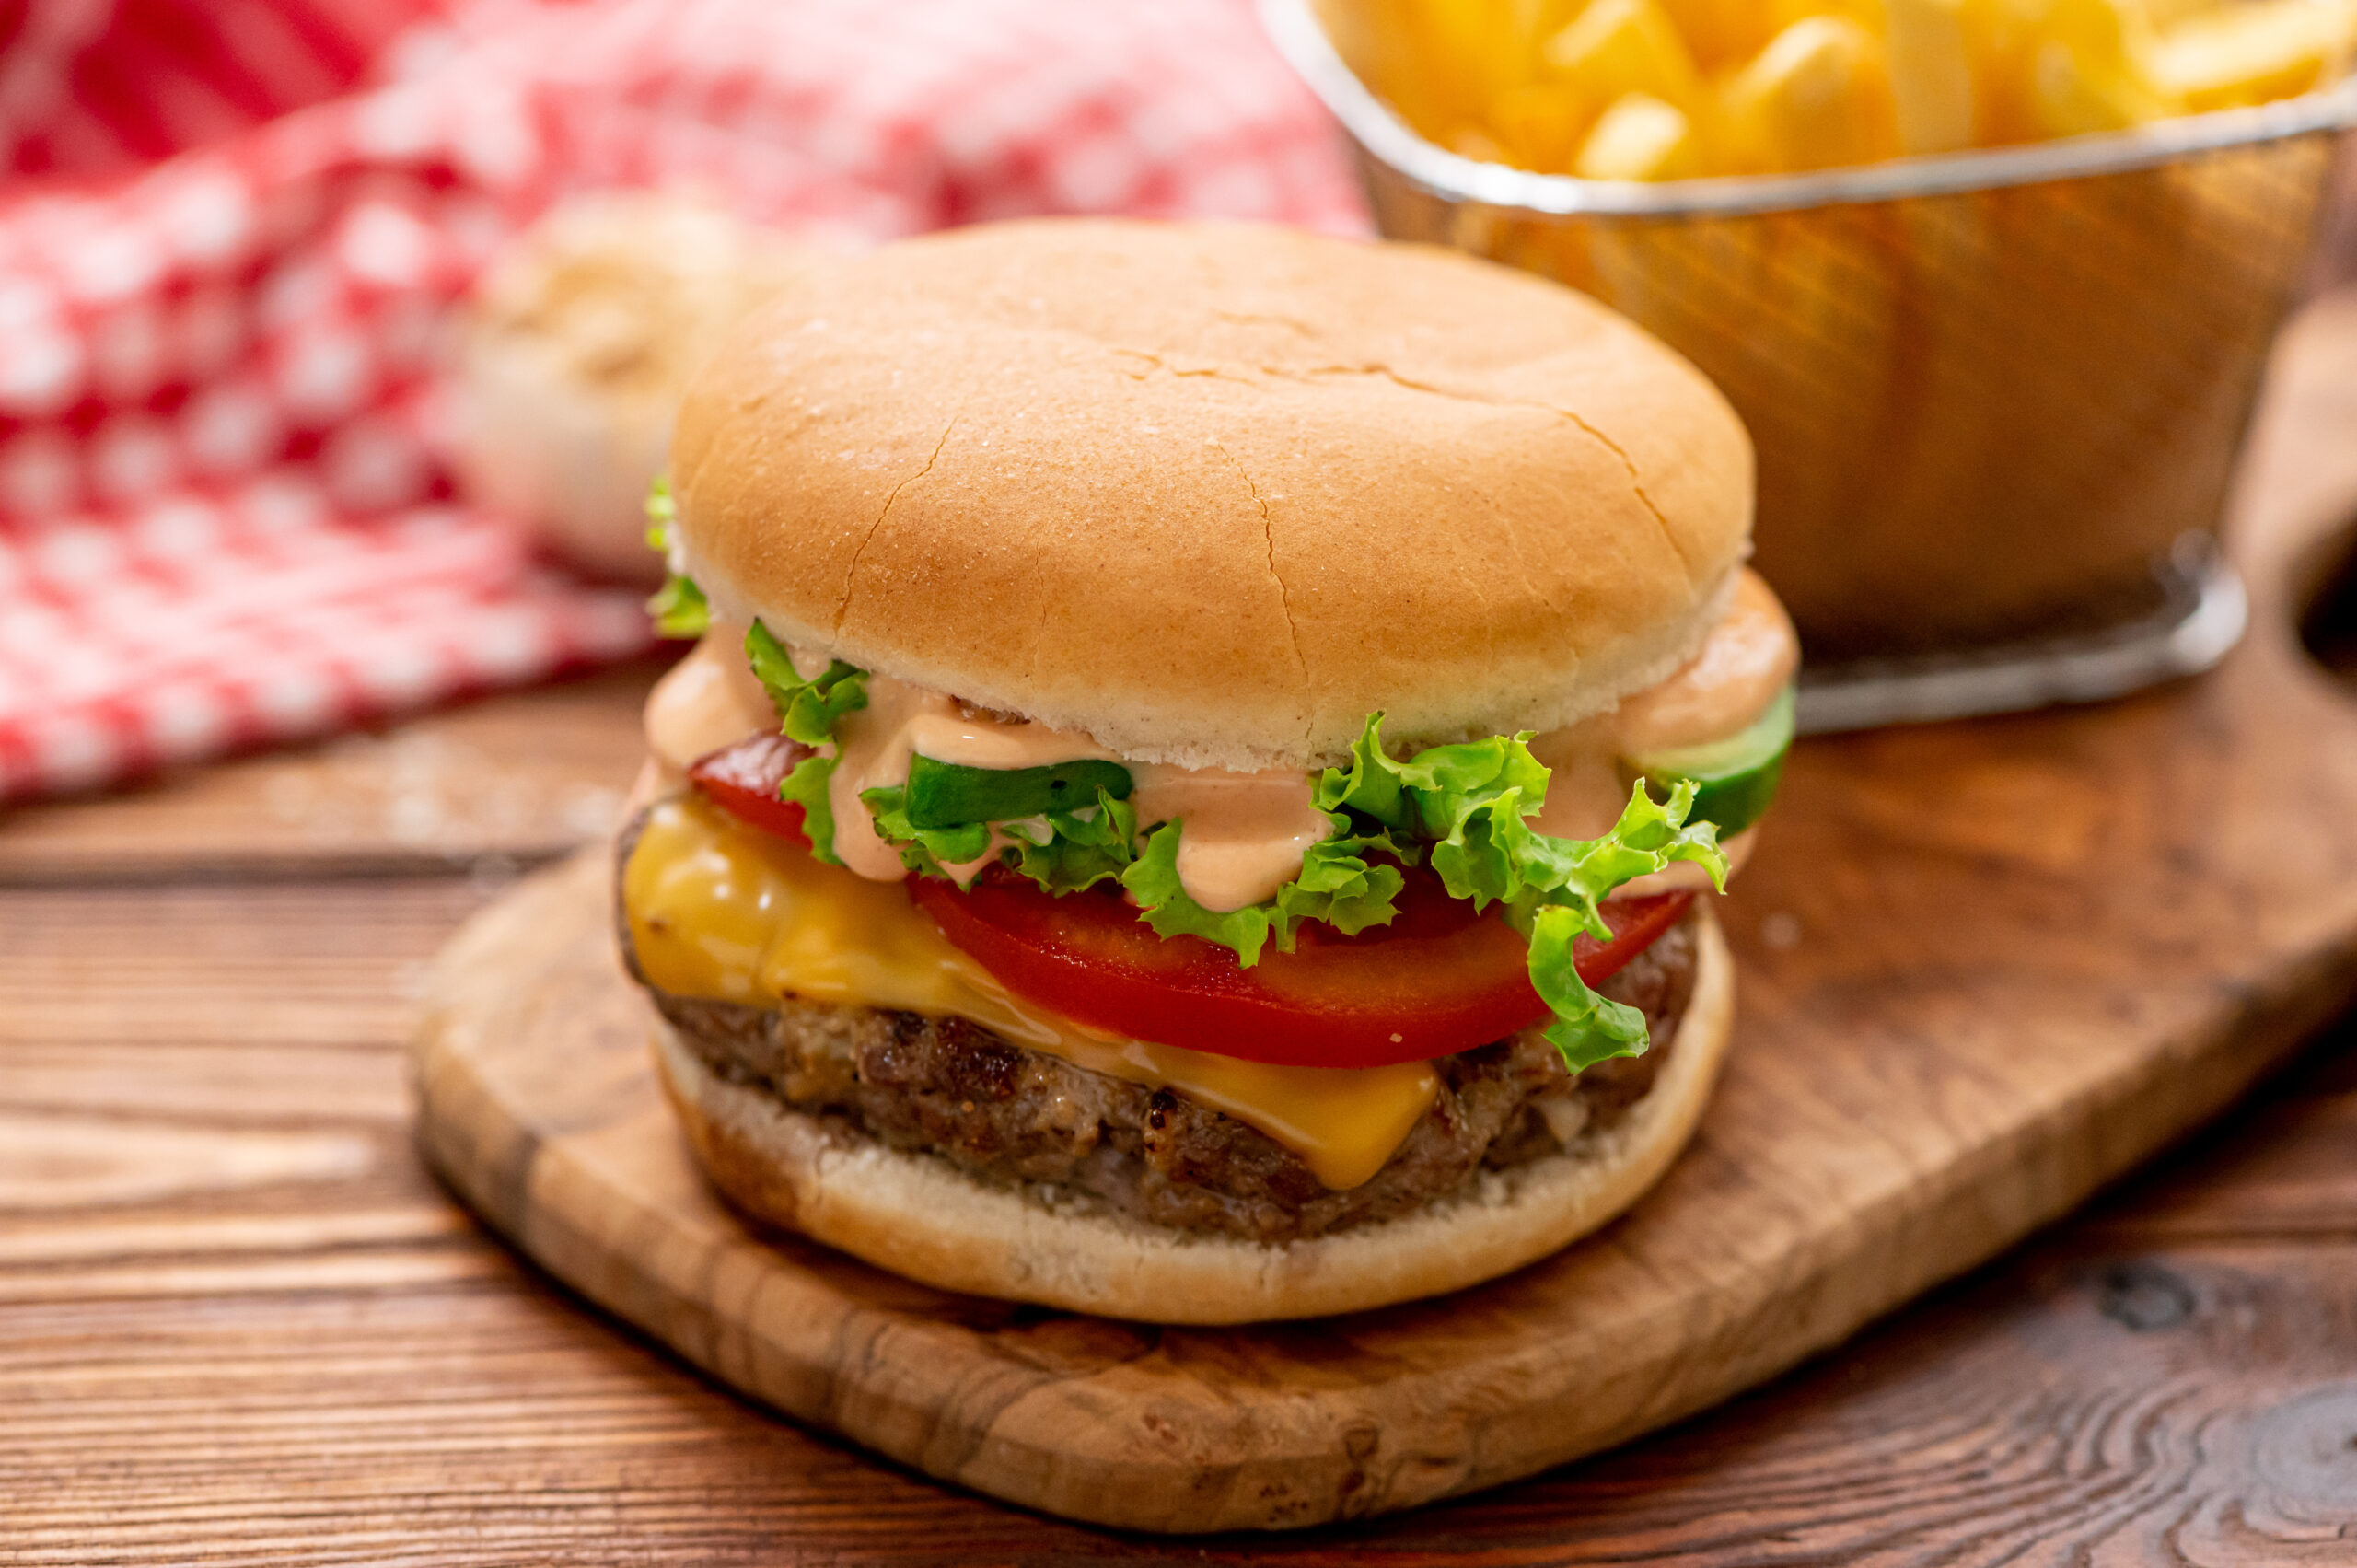 a juicy homemade hamburger loaded with toppings.